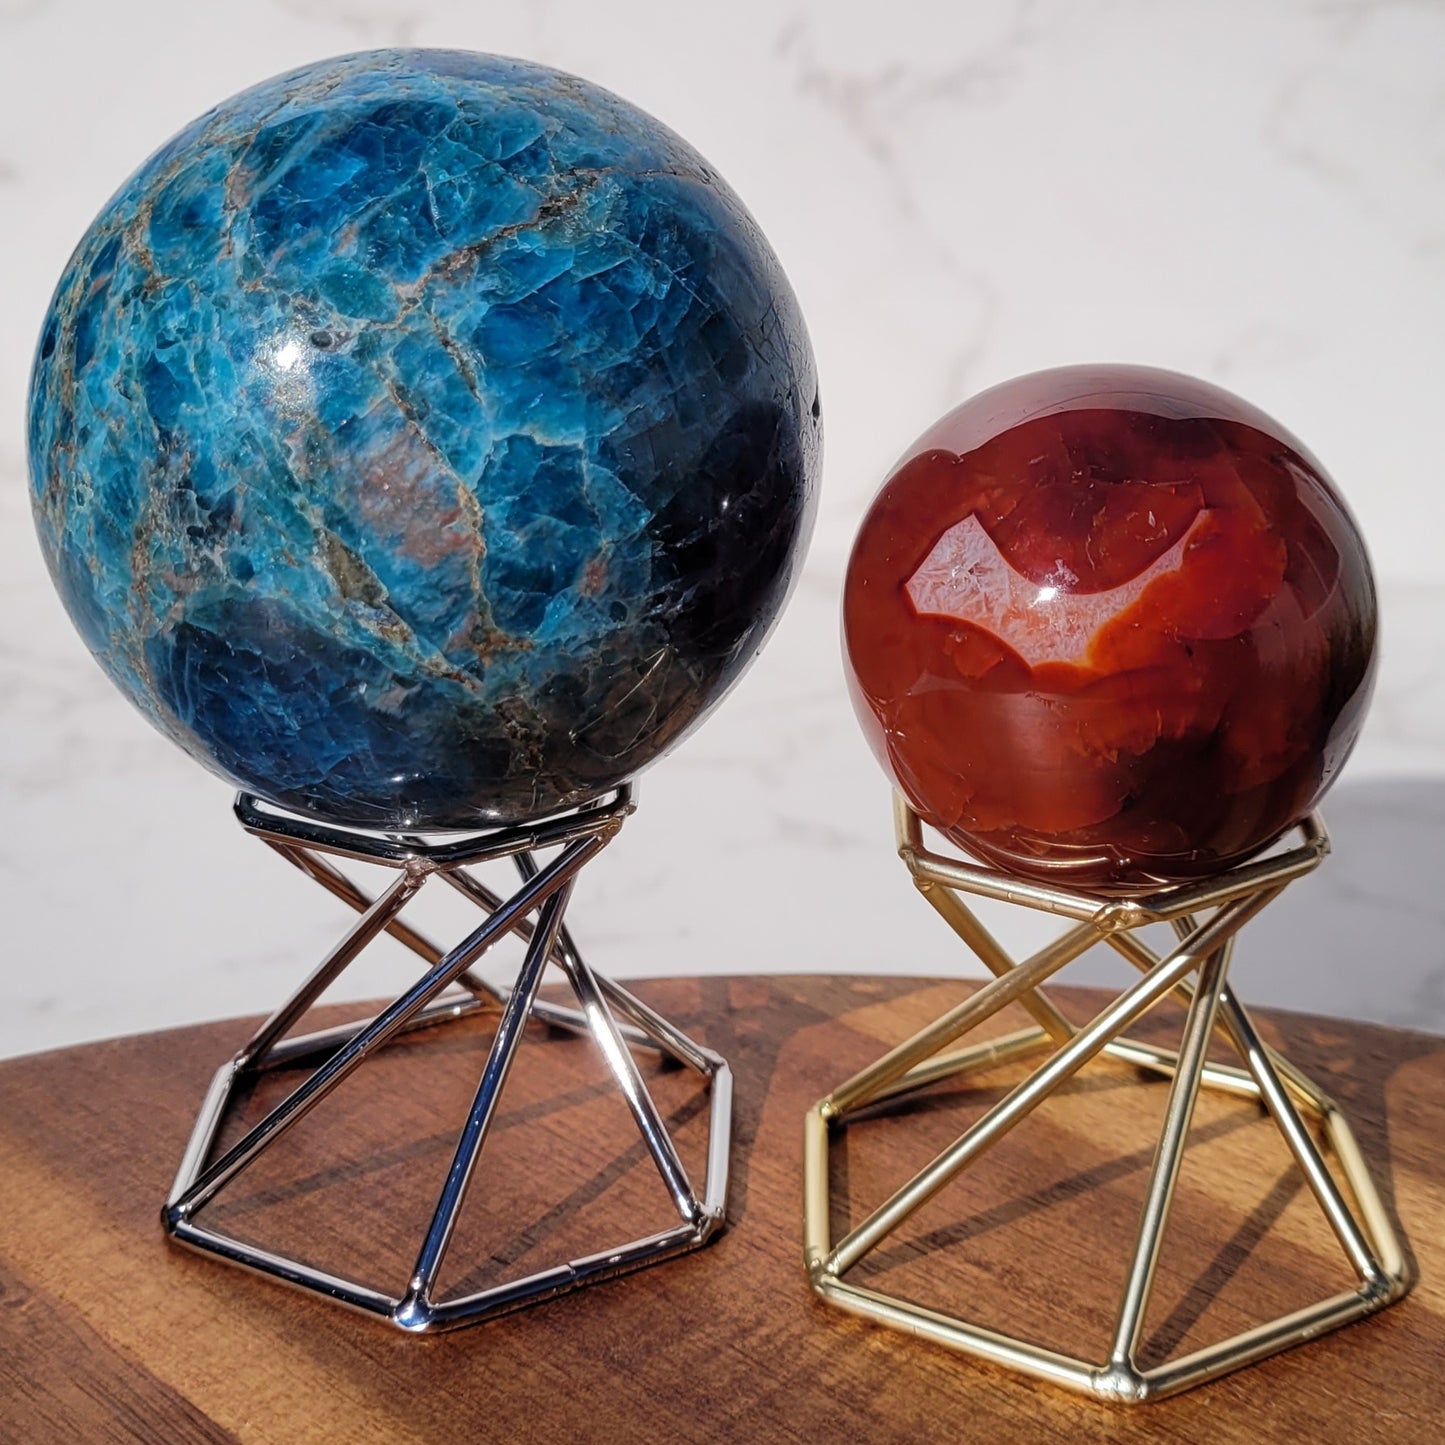 Metal Spiral Sphere Display Stands in Gold or Silver for Balls 1.7" to 4" (43mm to 102mm)